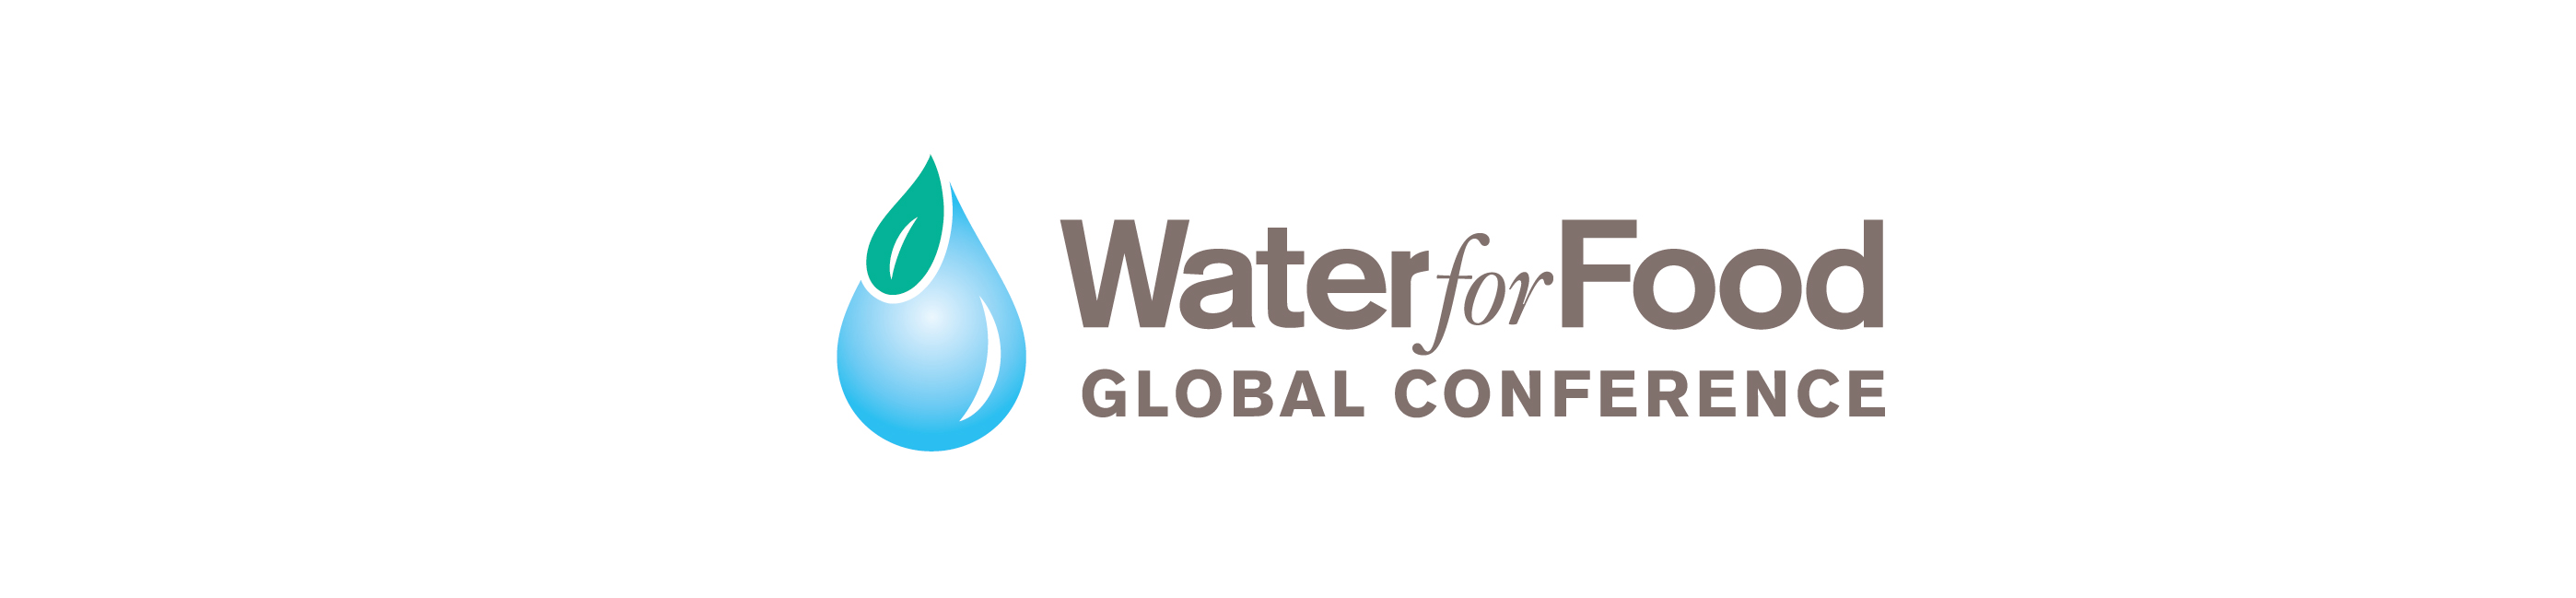 Global Water for Food Conference logo